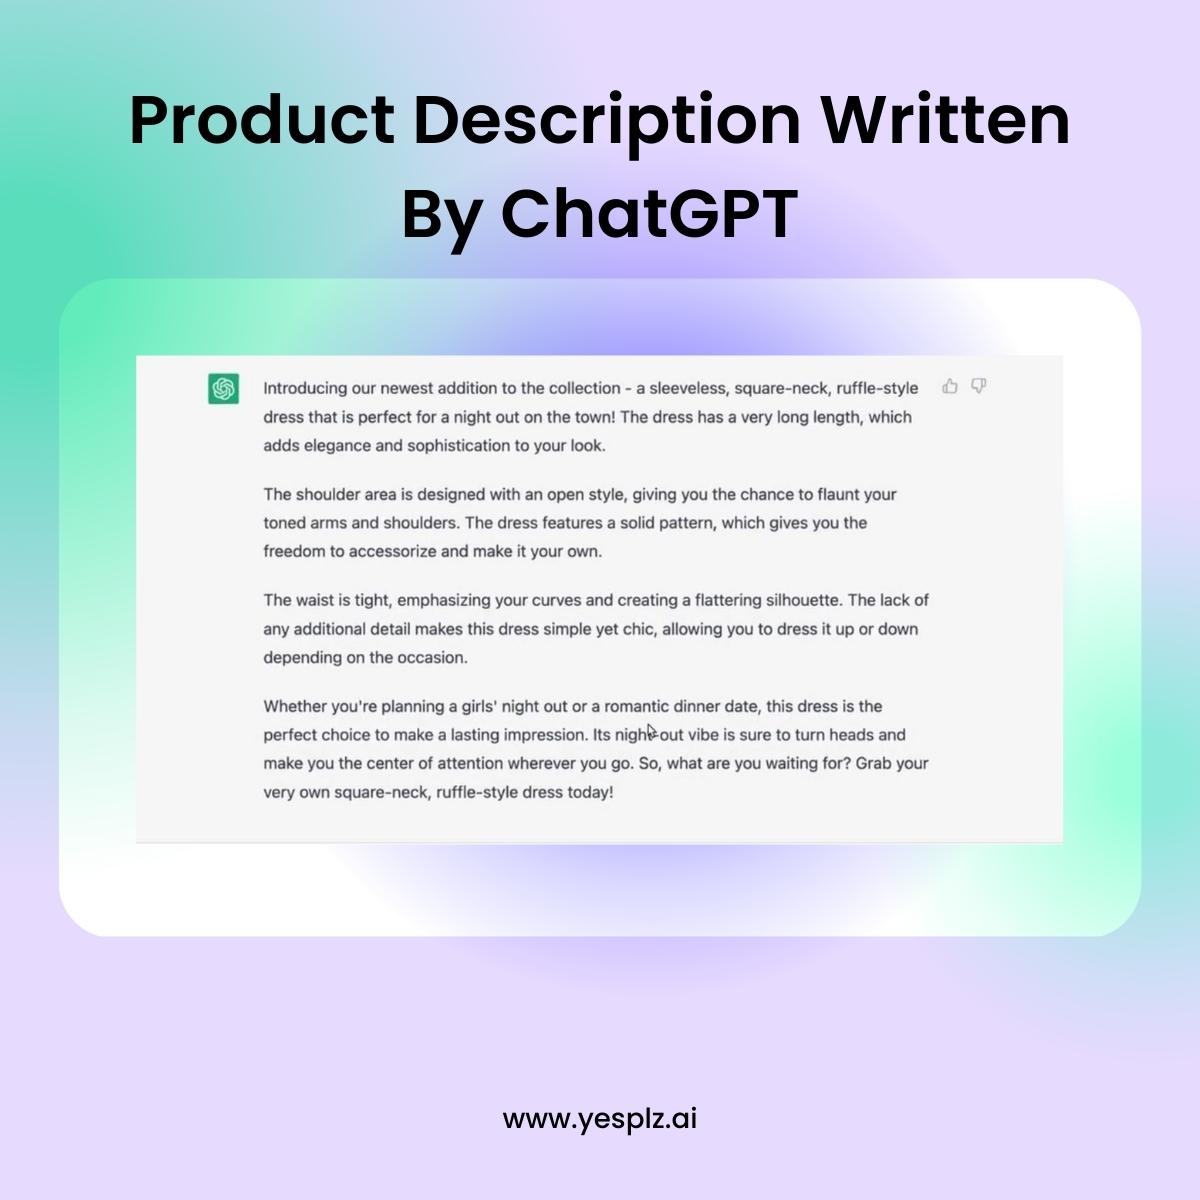 Product description for ecommerce written by ChatGPT